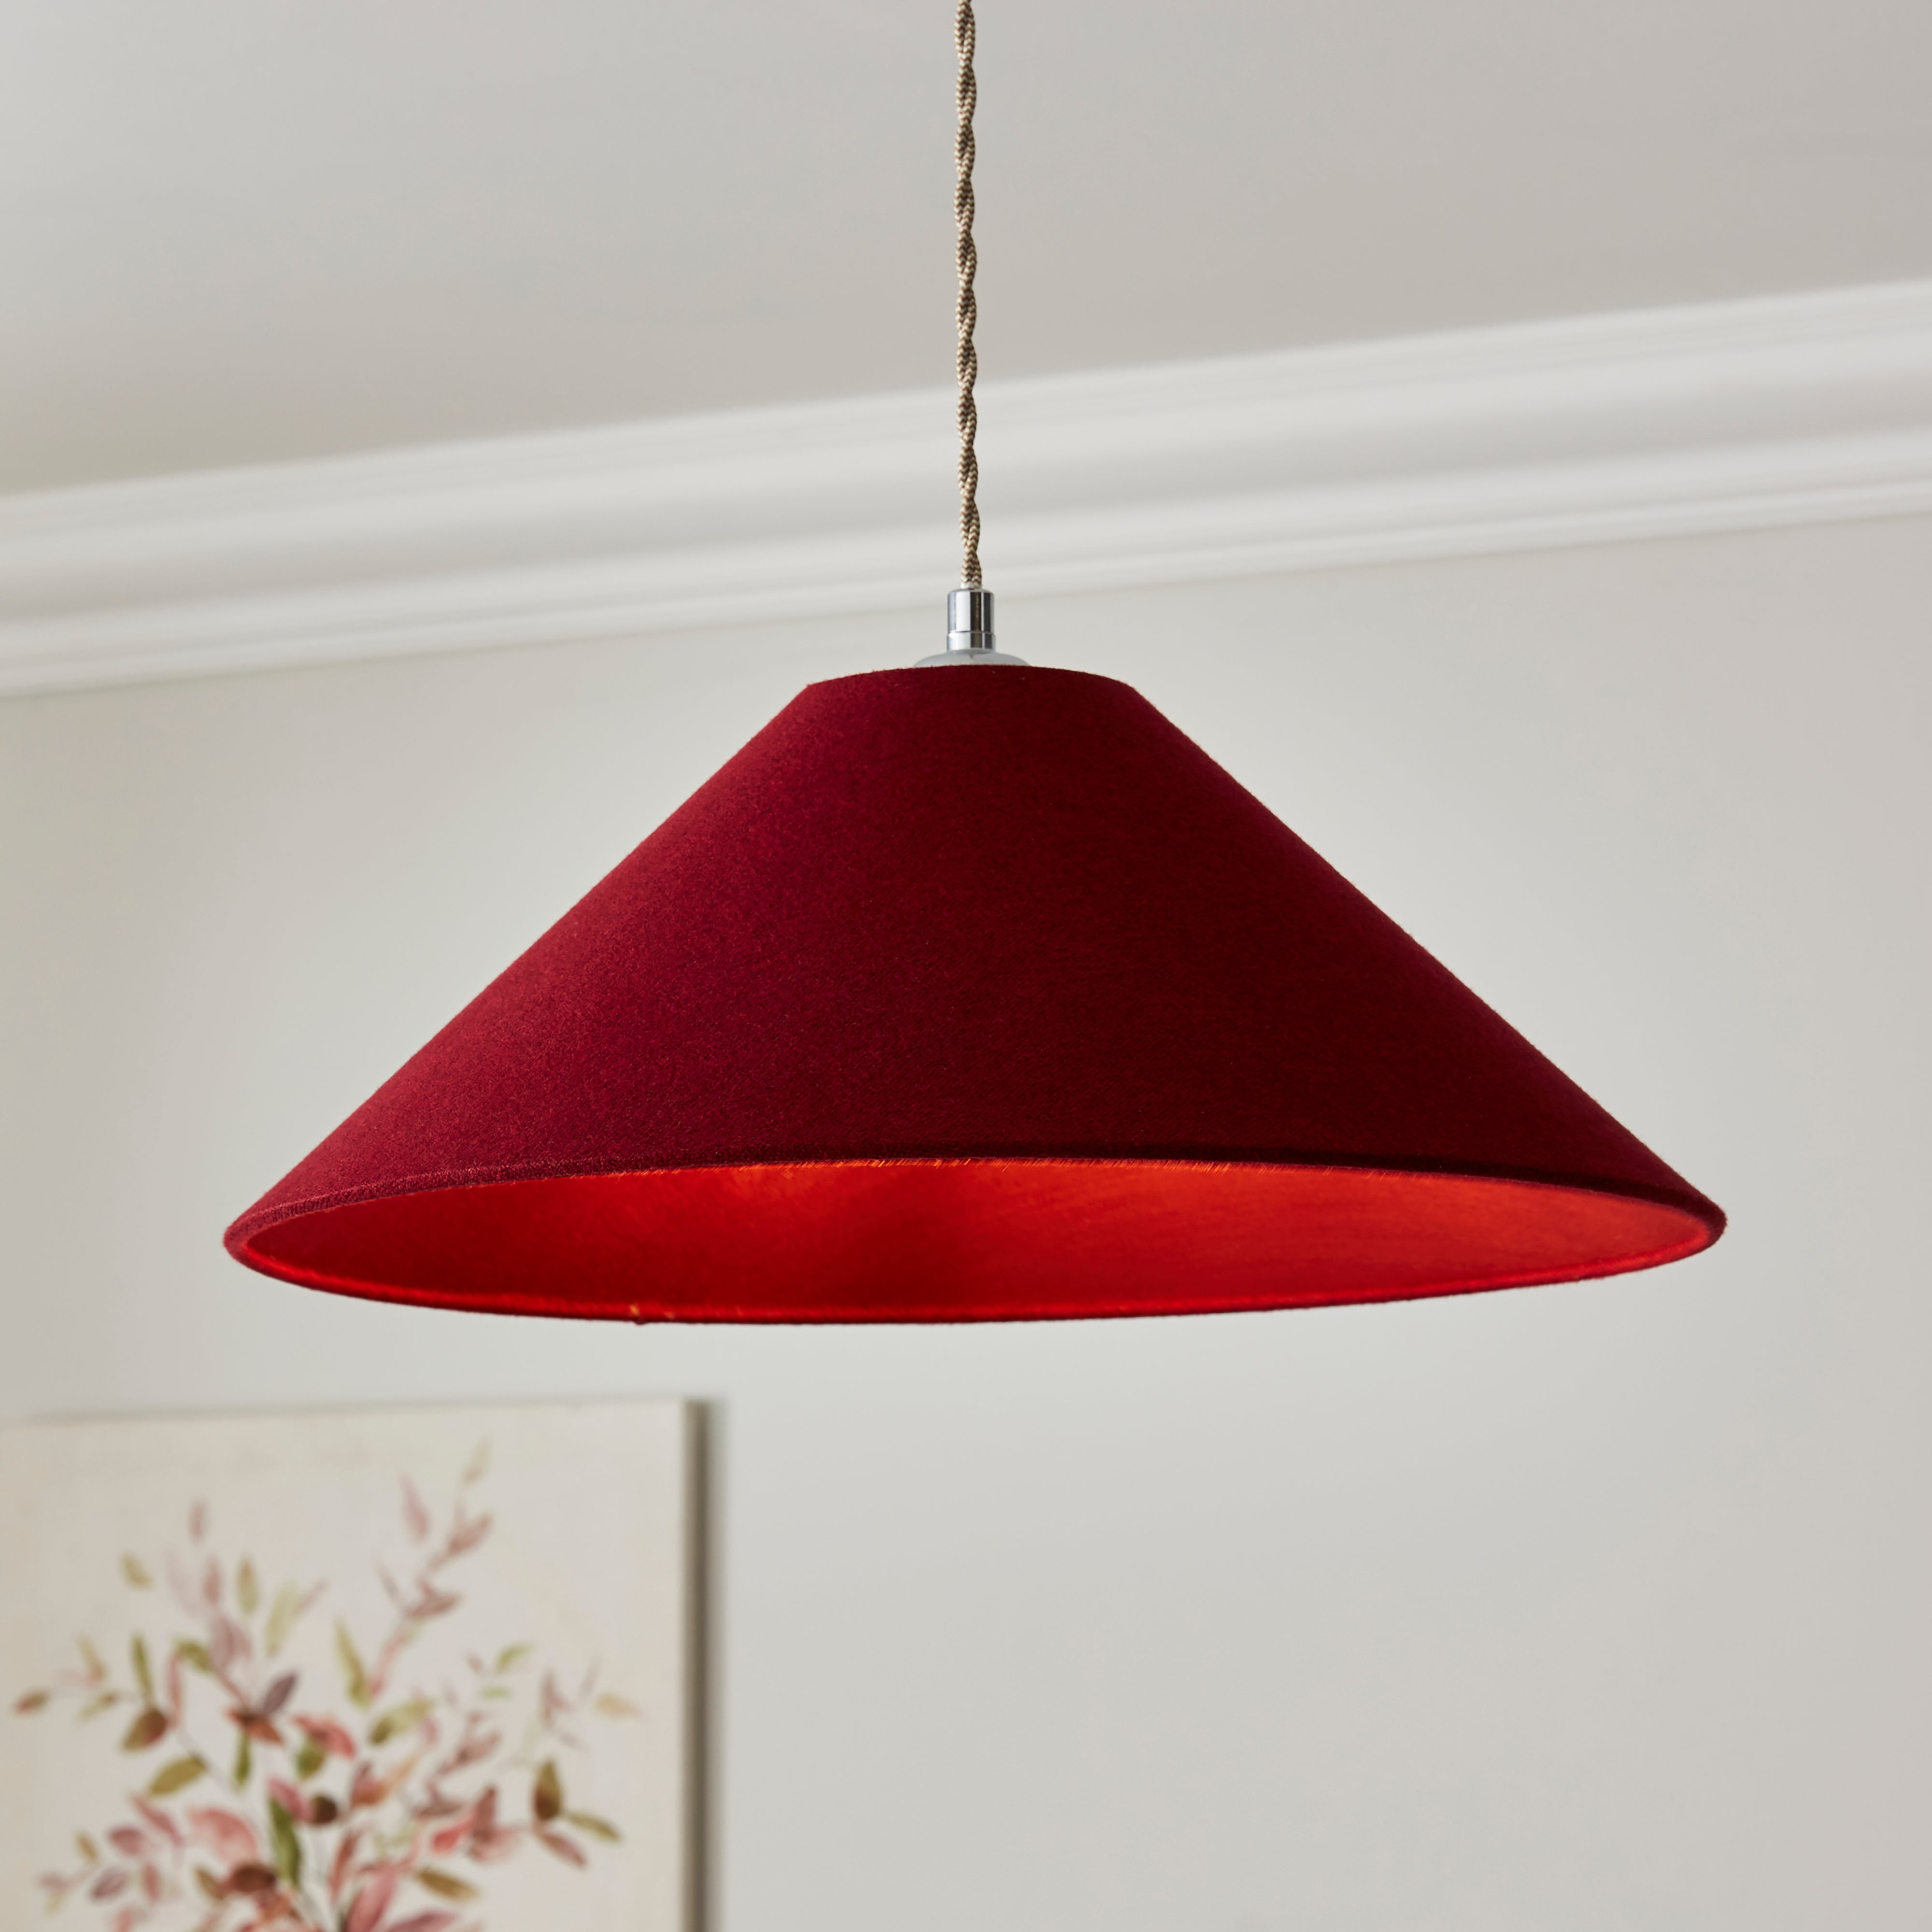 Churchgate Ashby Conical Extreme Empire Lamp Shade